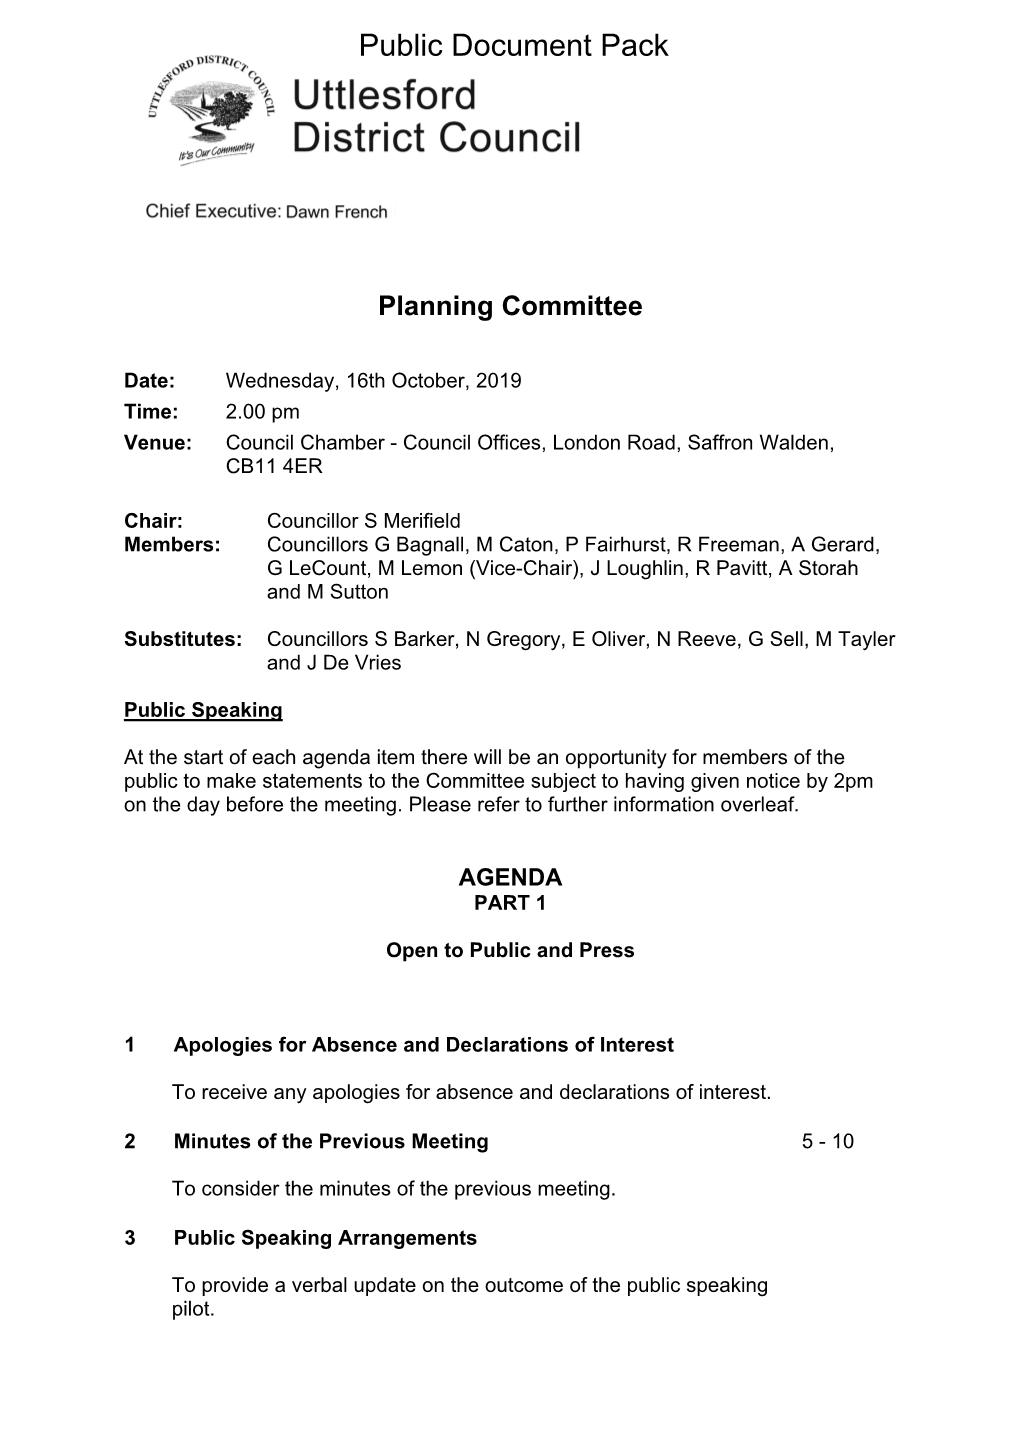 (Public Pack)Agenda Document for Planning Committee, 16/10/2019